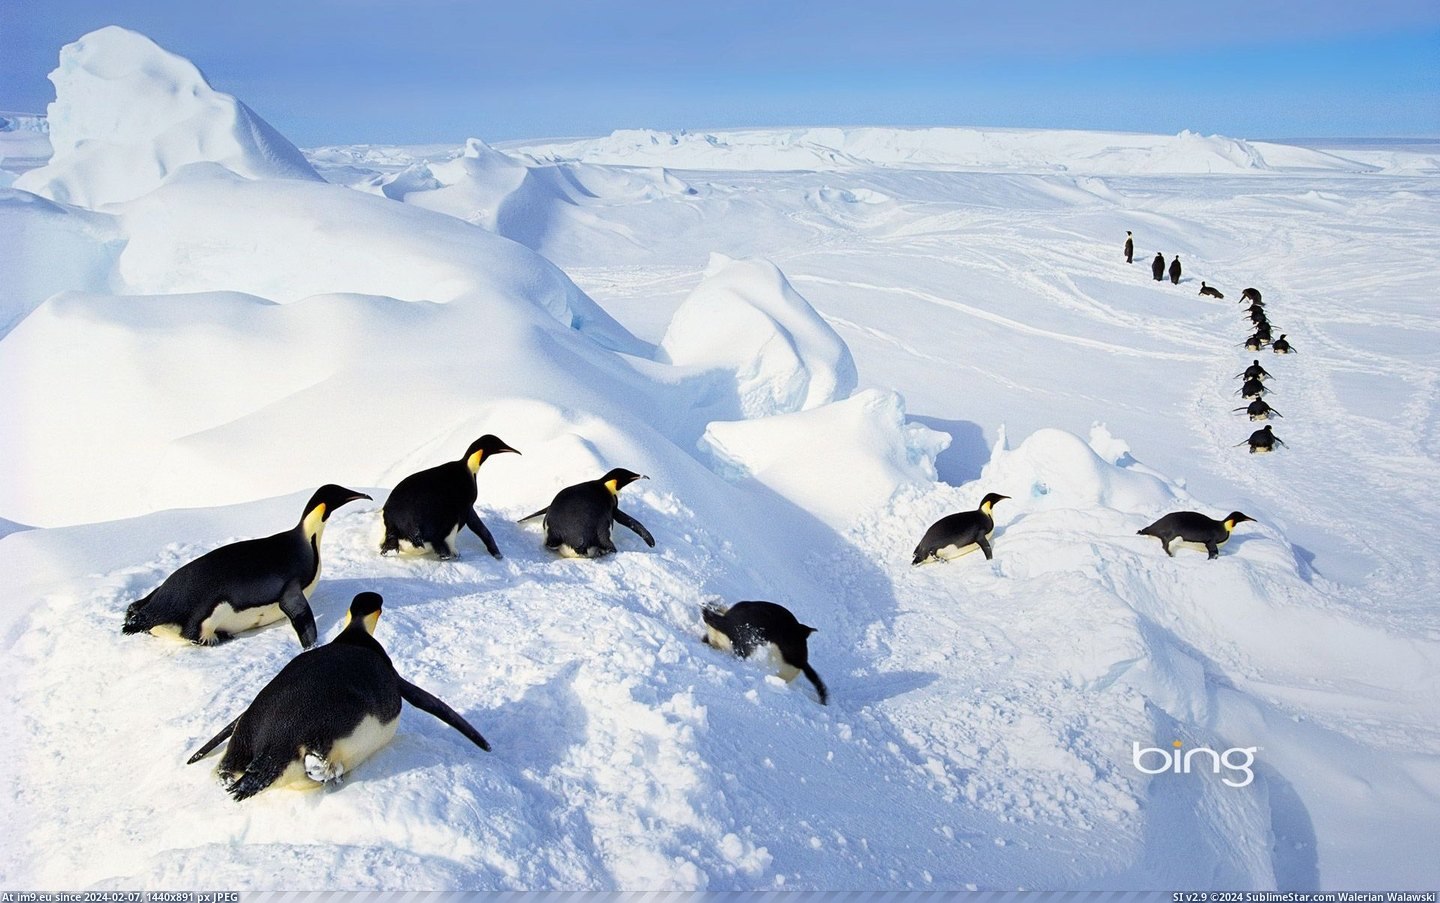 Emperor penguins belly-flopping out of the water, Antarctica (©Getty Images) (in Best photos of January 2013)